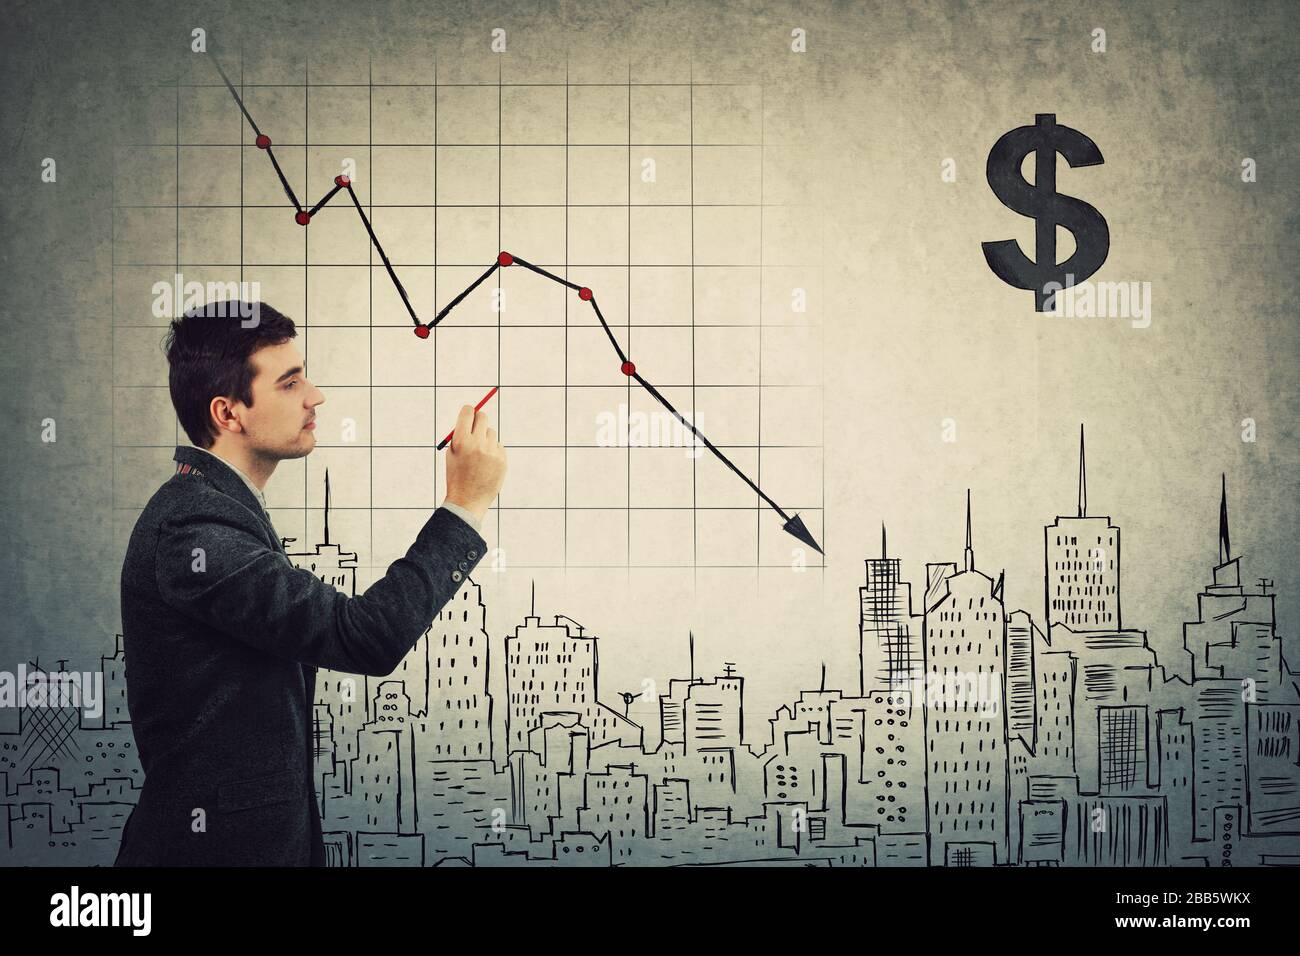 Businessman analyst gives pessimistic prognosis of COVID-19 impact to the future world economics, drawing decline graph of stock market. Global financ Stock Photo